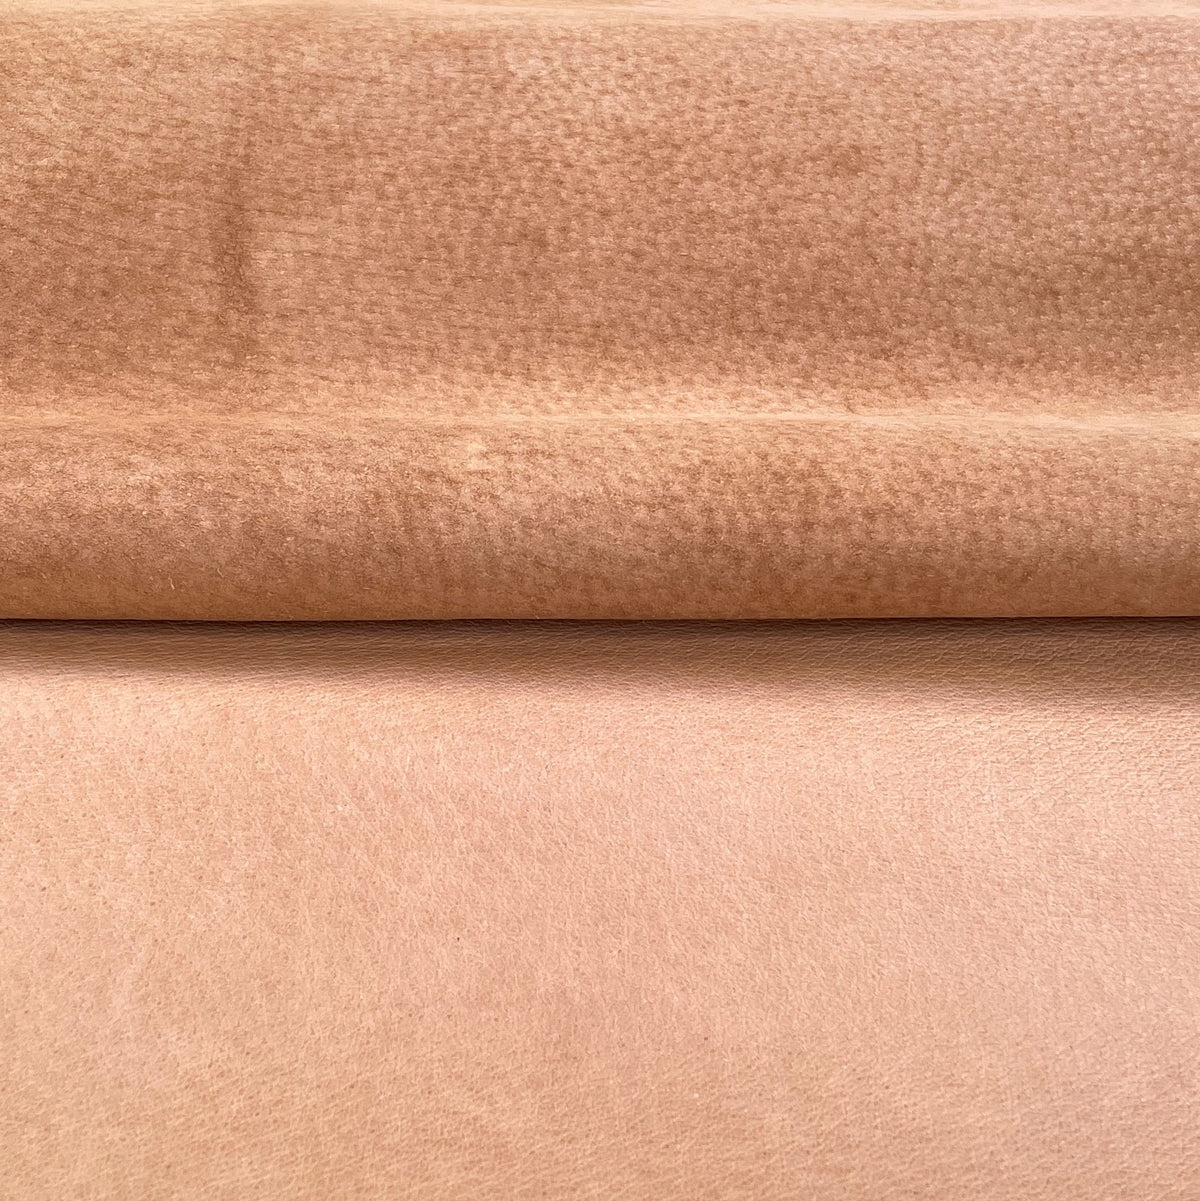 Pig Skin Lining | Tan | 0.6mm | 14 sq.ft | From $55 ea.